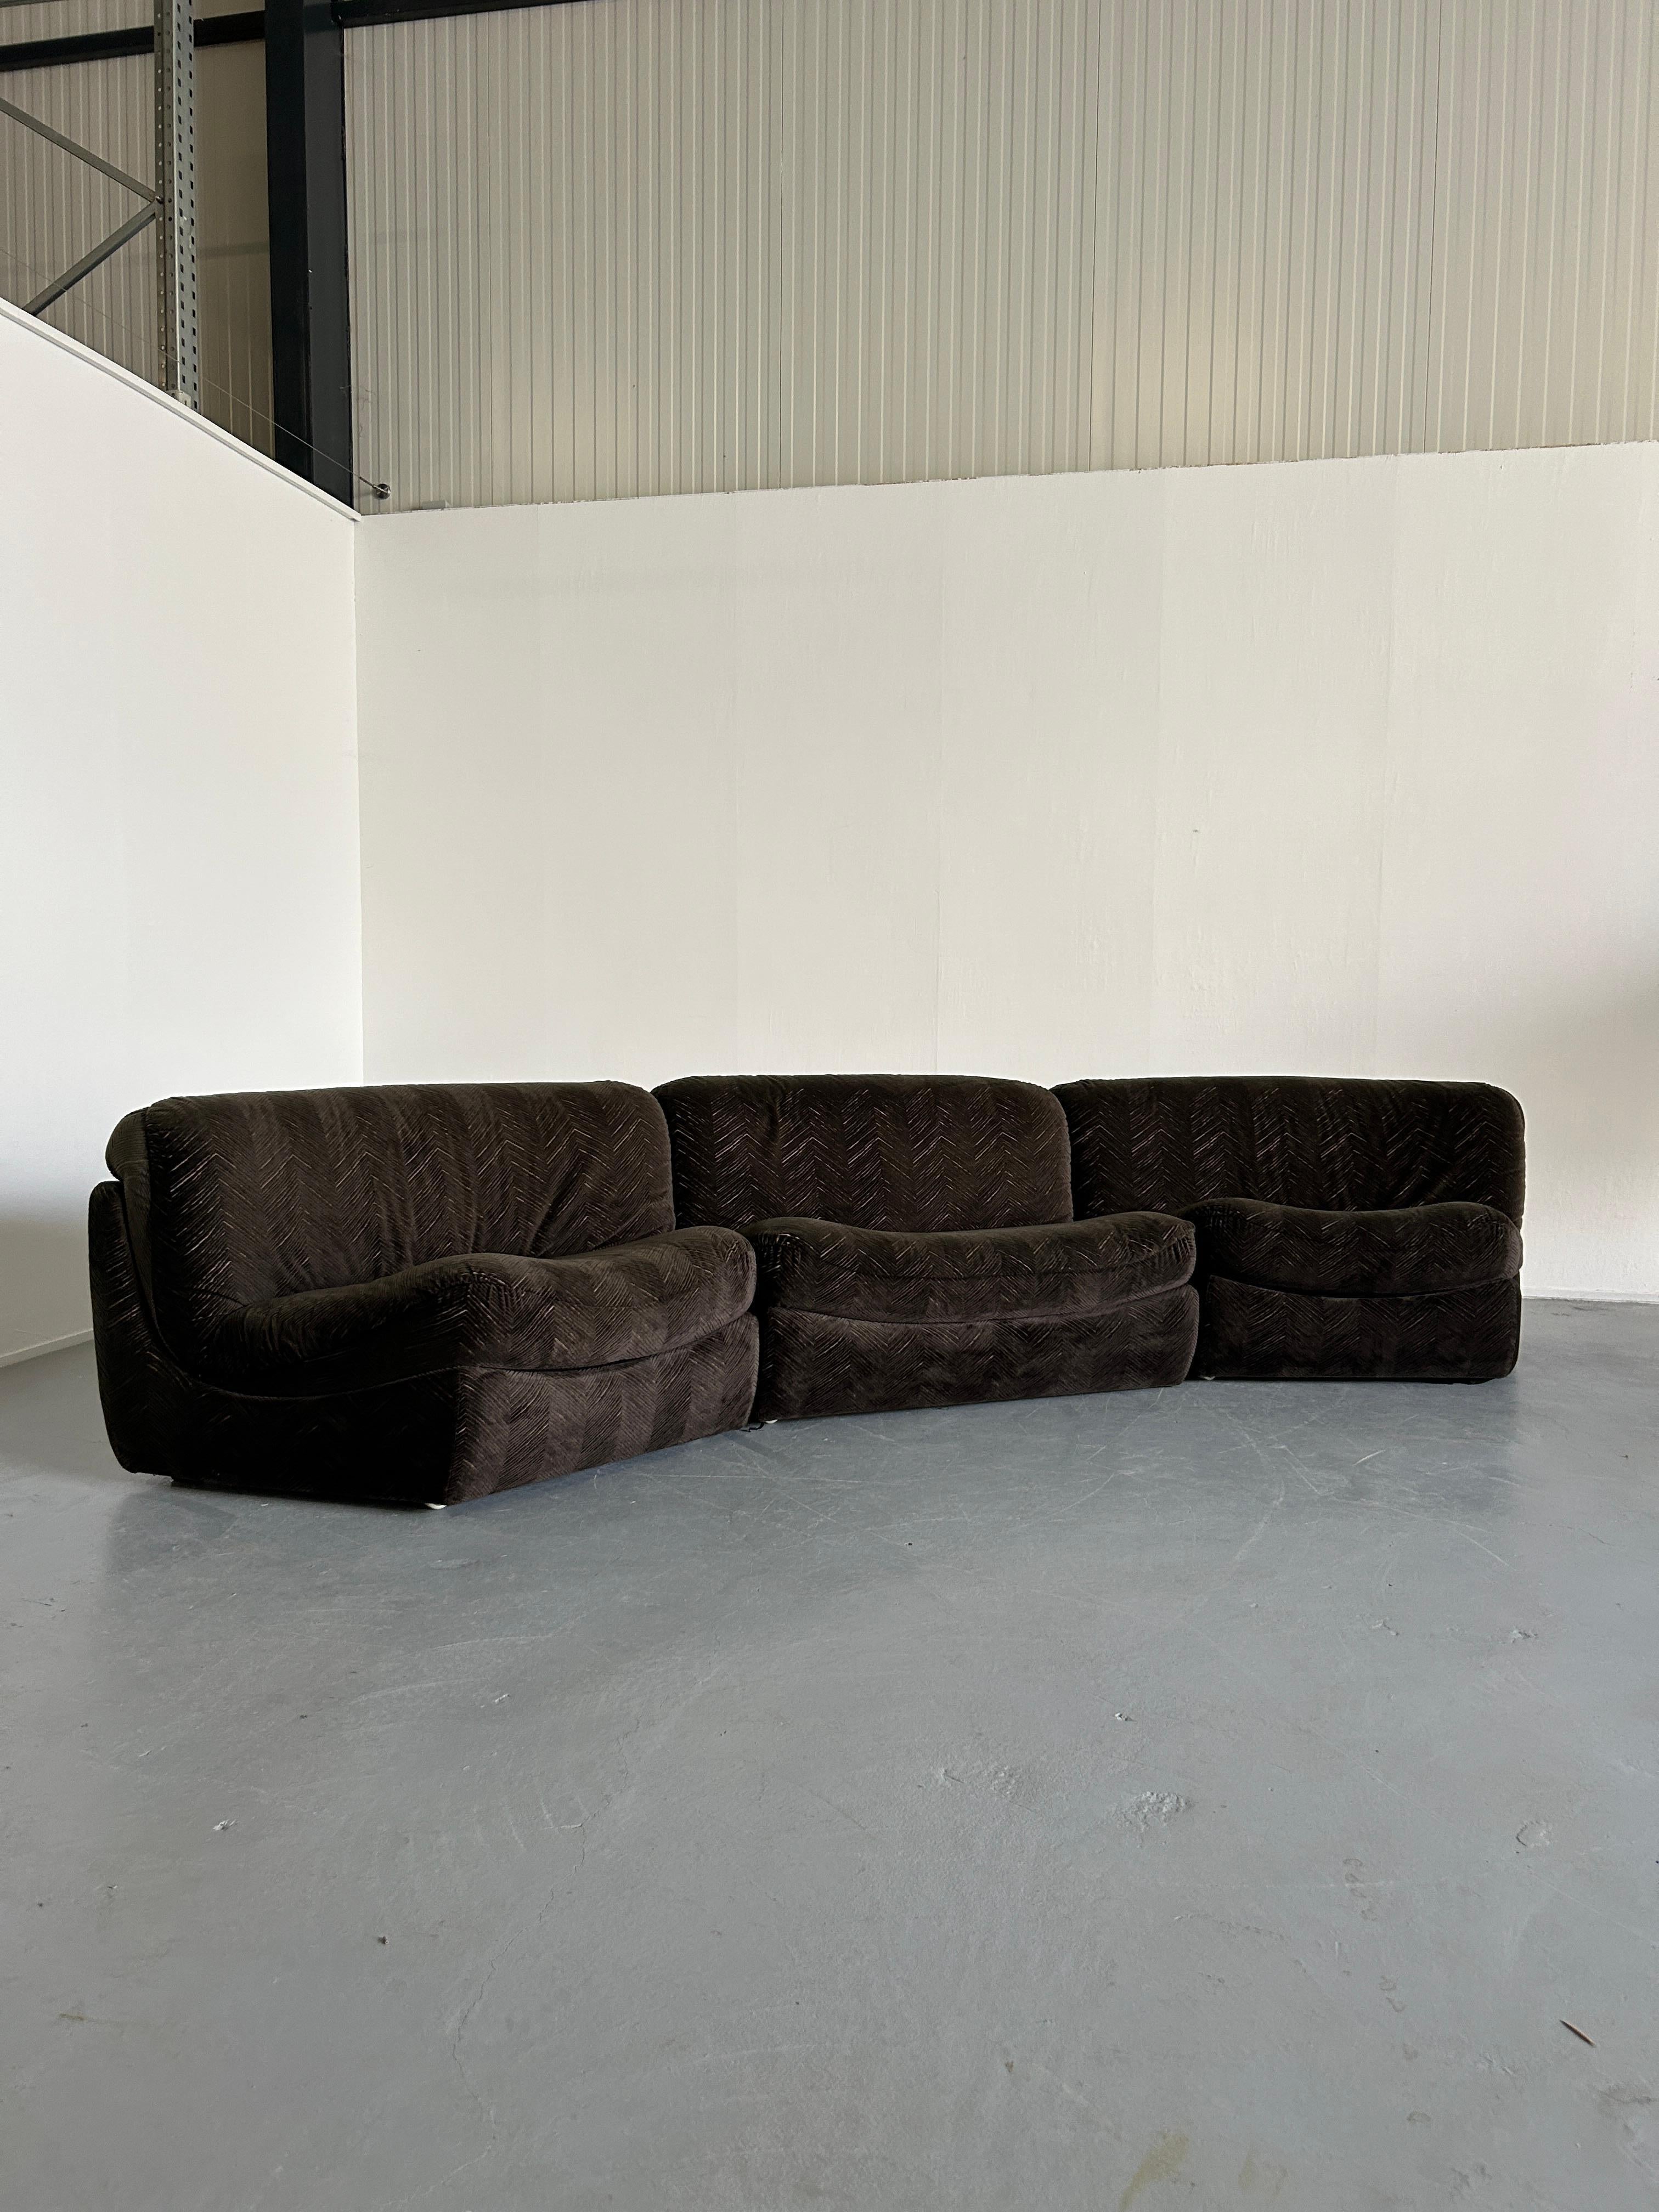 A beautiful three-part Mid-Century-Modern curved modular sofa in the style of Vladimir Kagan or Milo Baughman.
A vintage production attributed to the high-end manufacturer Wittmann from Austria - as claimed by the original owner, from whom the sofa